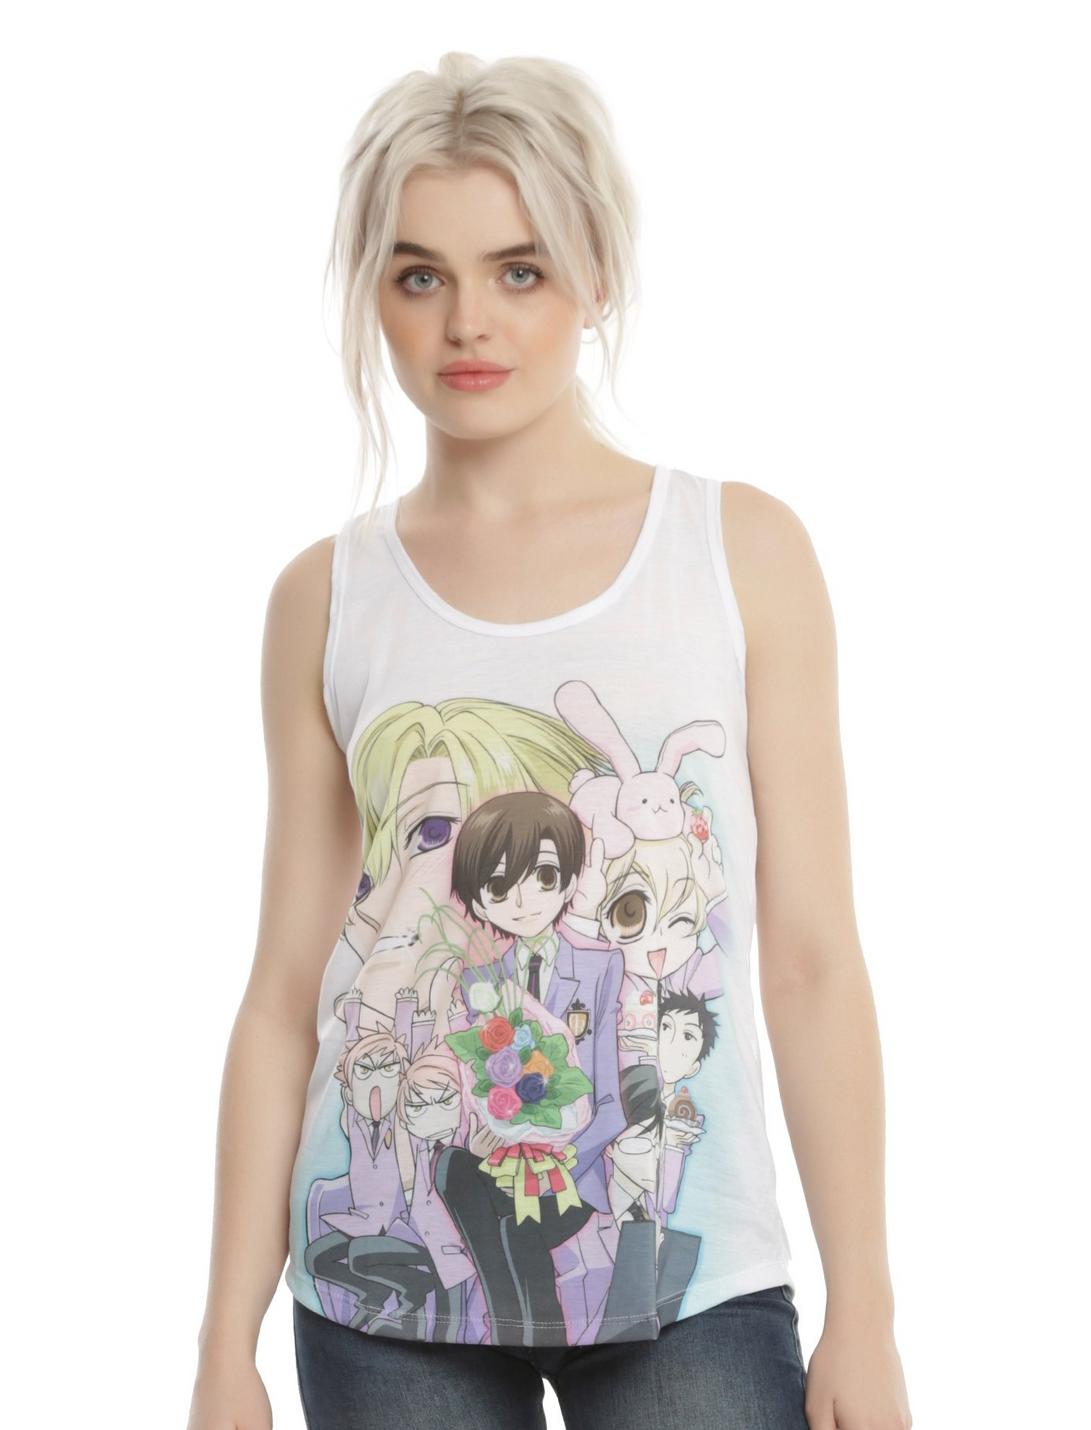 Ouran Host Club Hosts Girls Tank Top, WHITE, hi-res